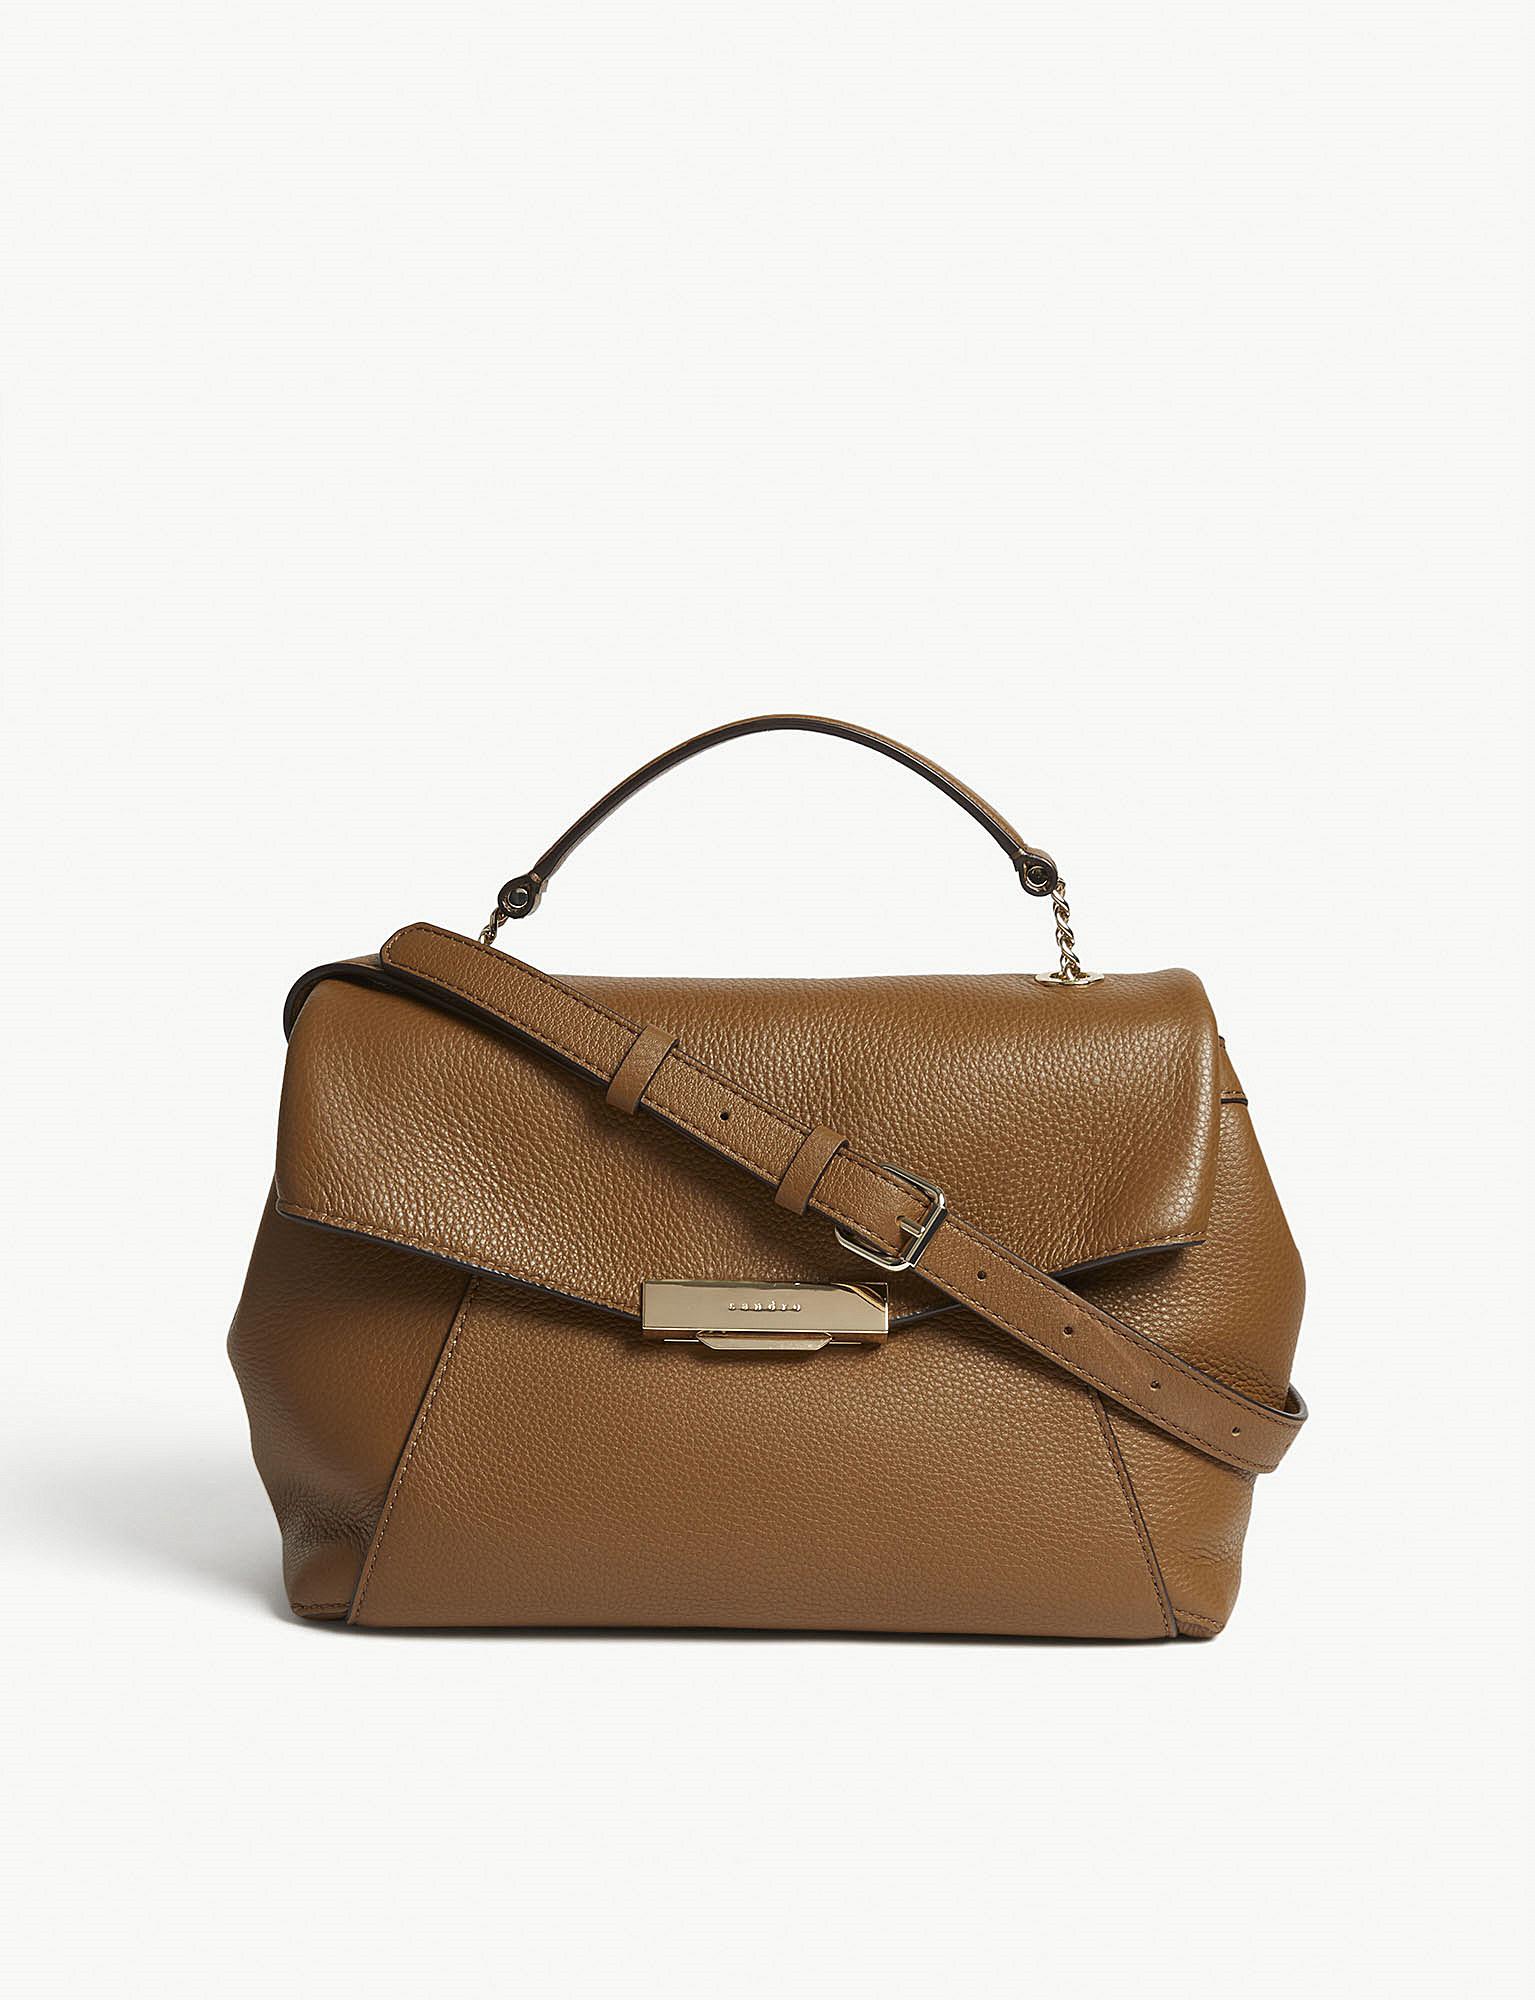 Sandro Yza Leather Shoulder Bag in Brown - Lyst